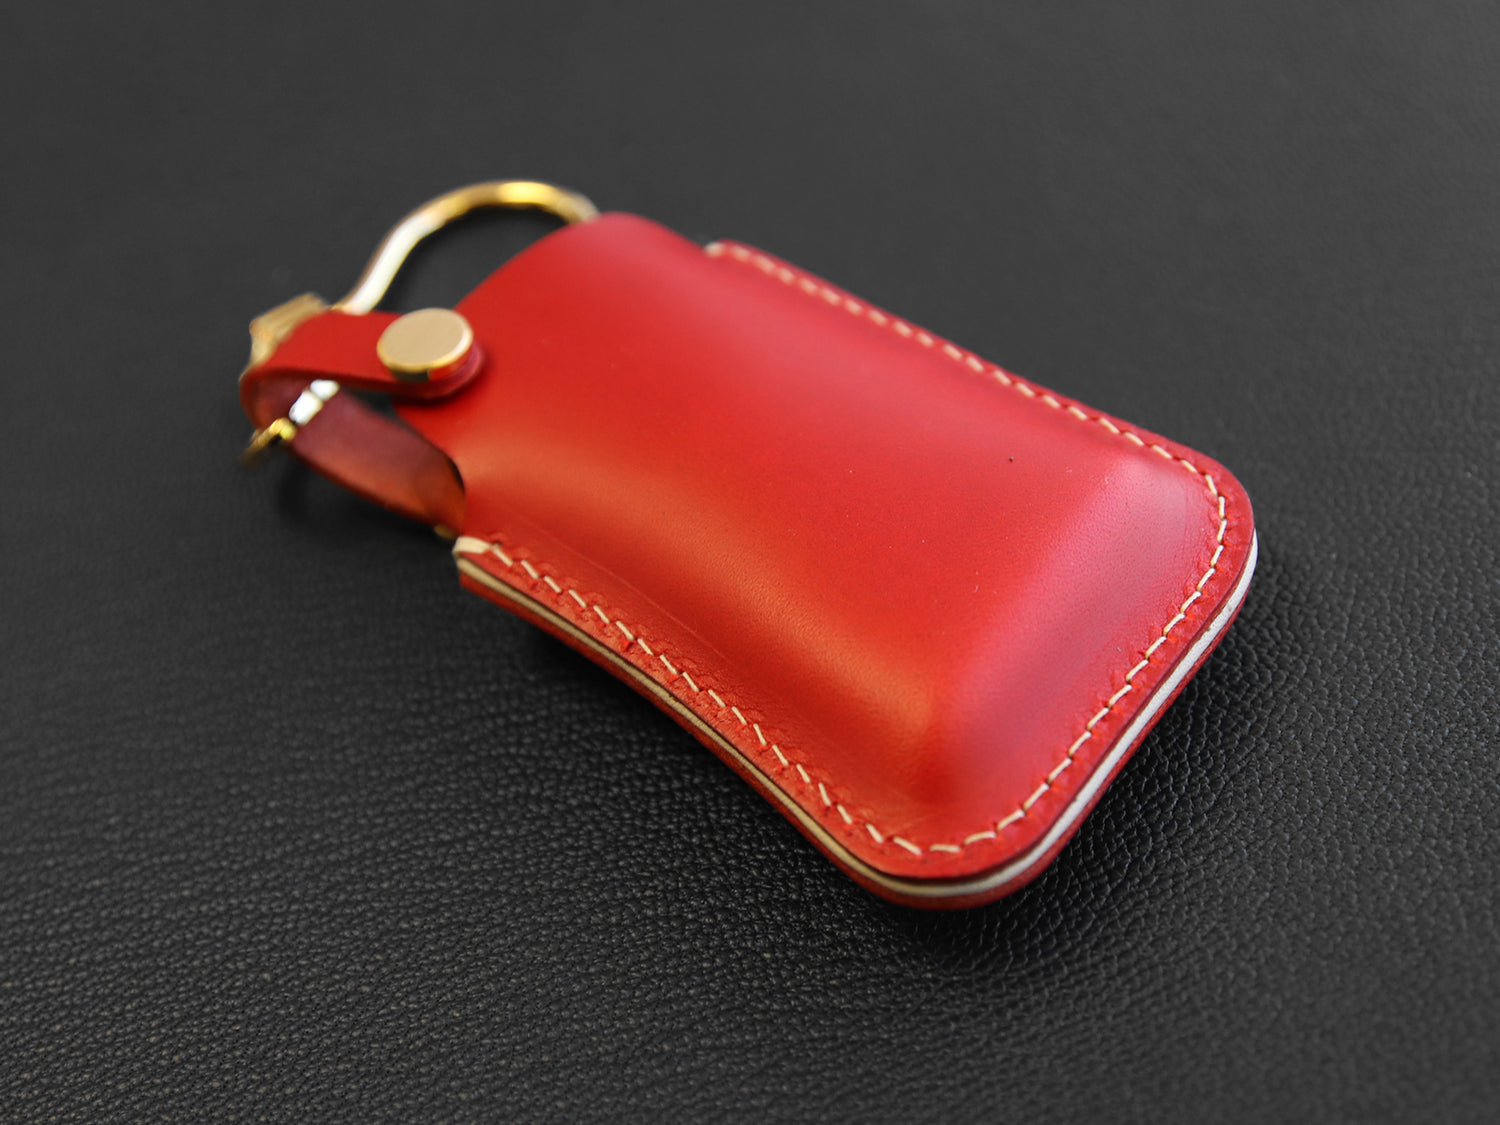 Lexus Series [2] Leather Key fob Cover - UX200, LS500, LS500H, LC500, LC500h, ES300h, ES350 - Italian Veg-Tanned Leather